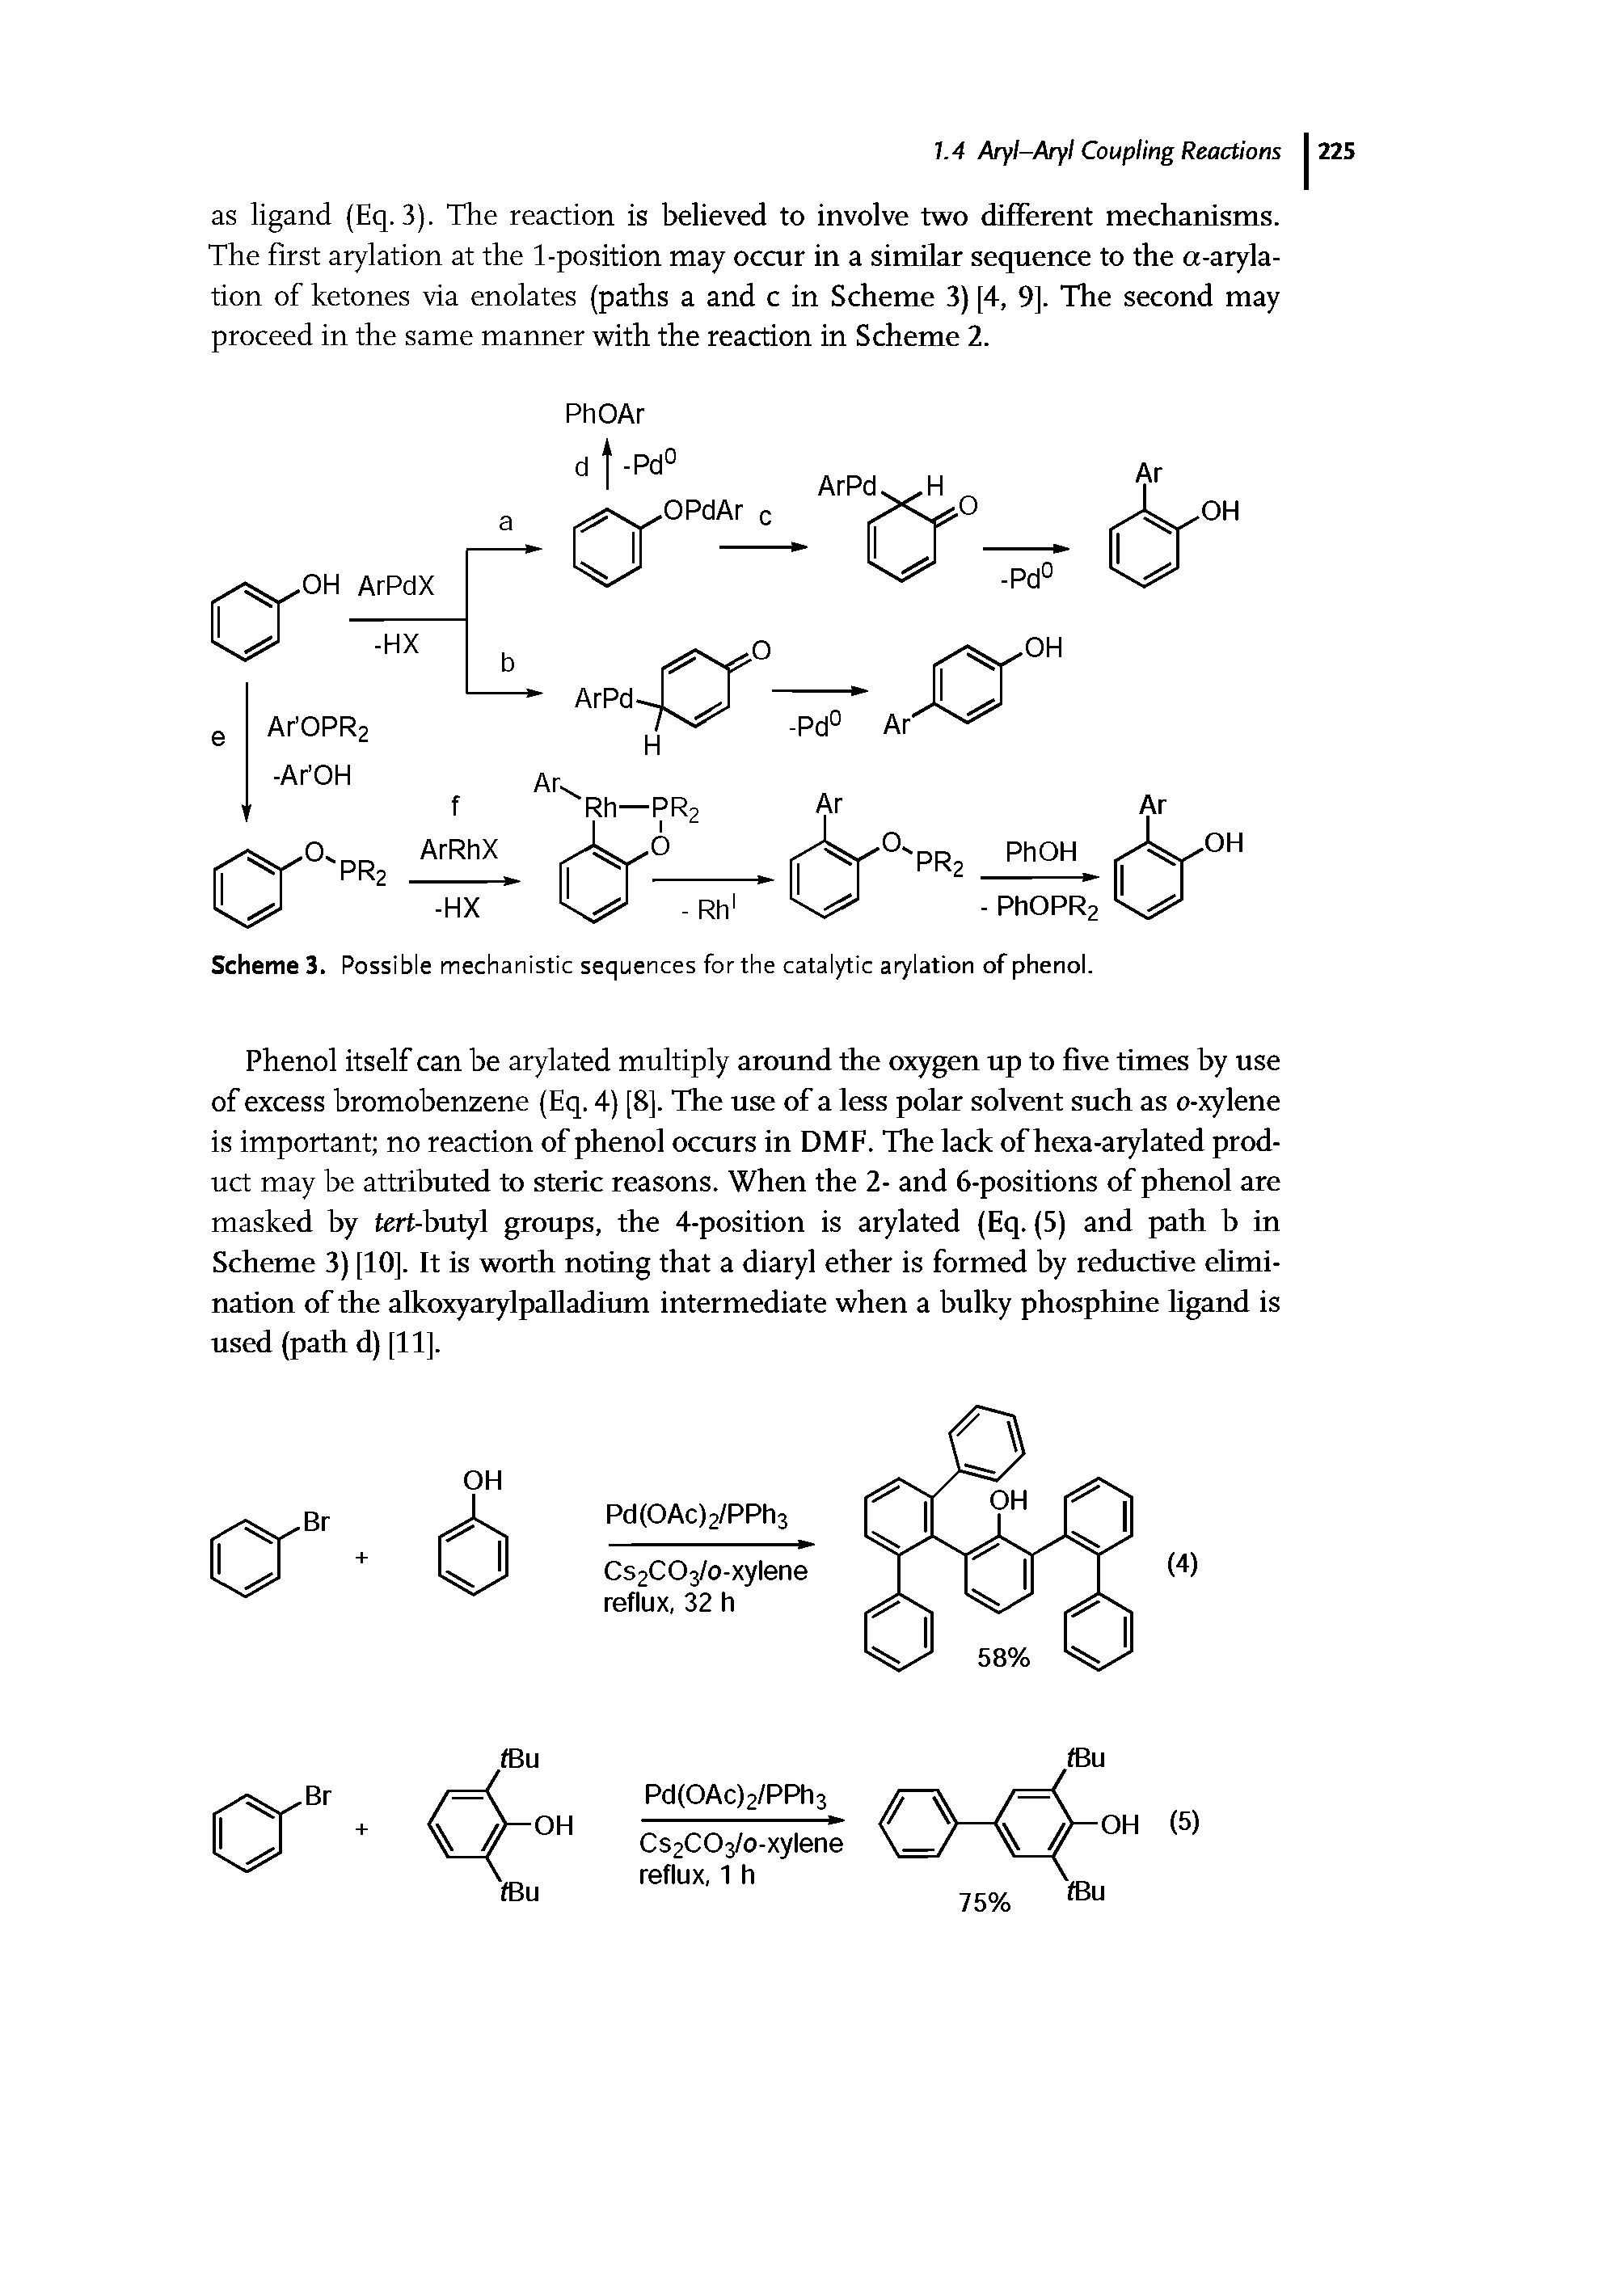 Scheme 3. Possible mechanistic sequences for the catalytic arylation of phenol.